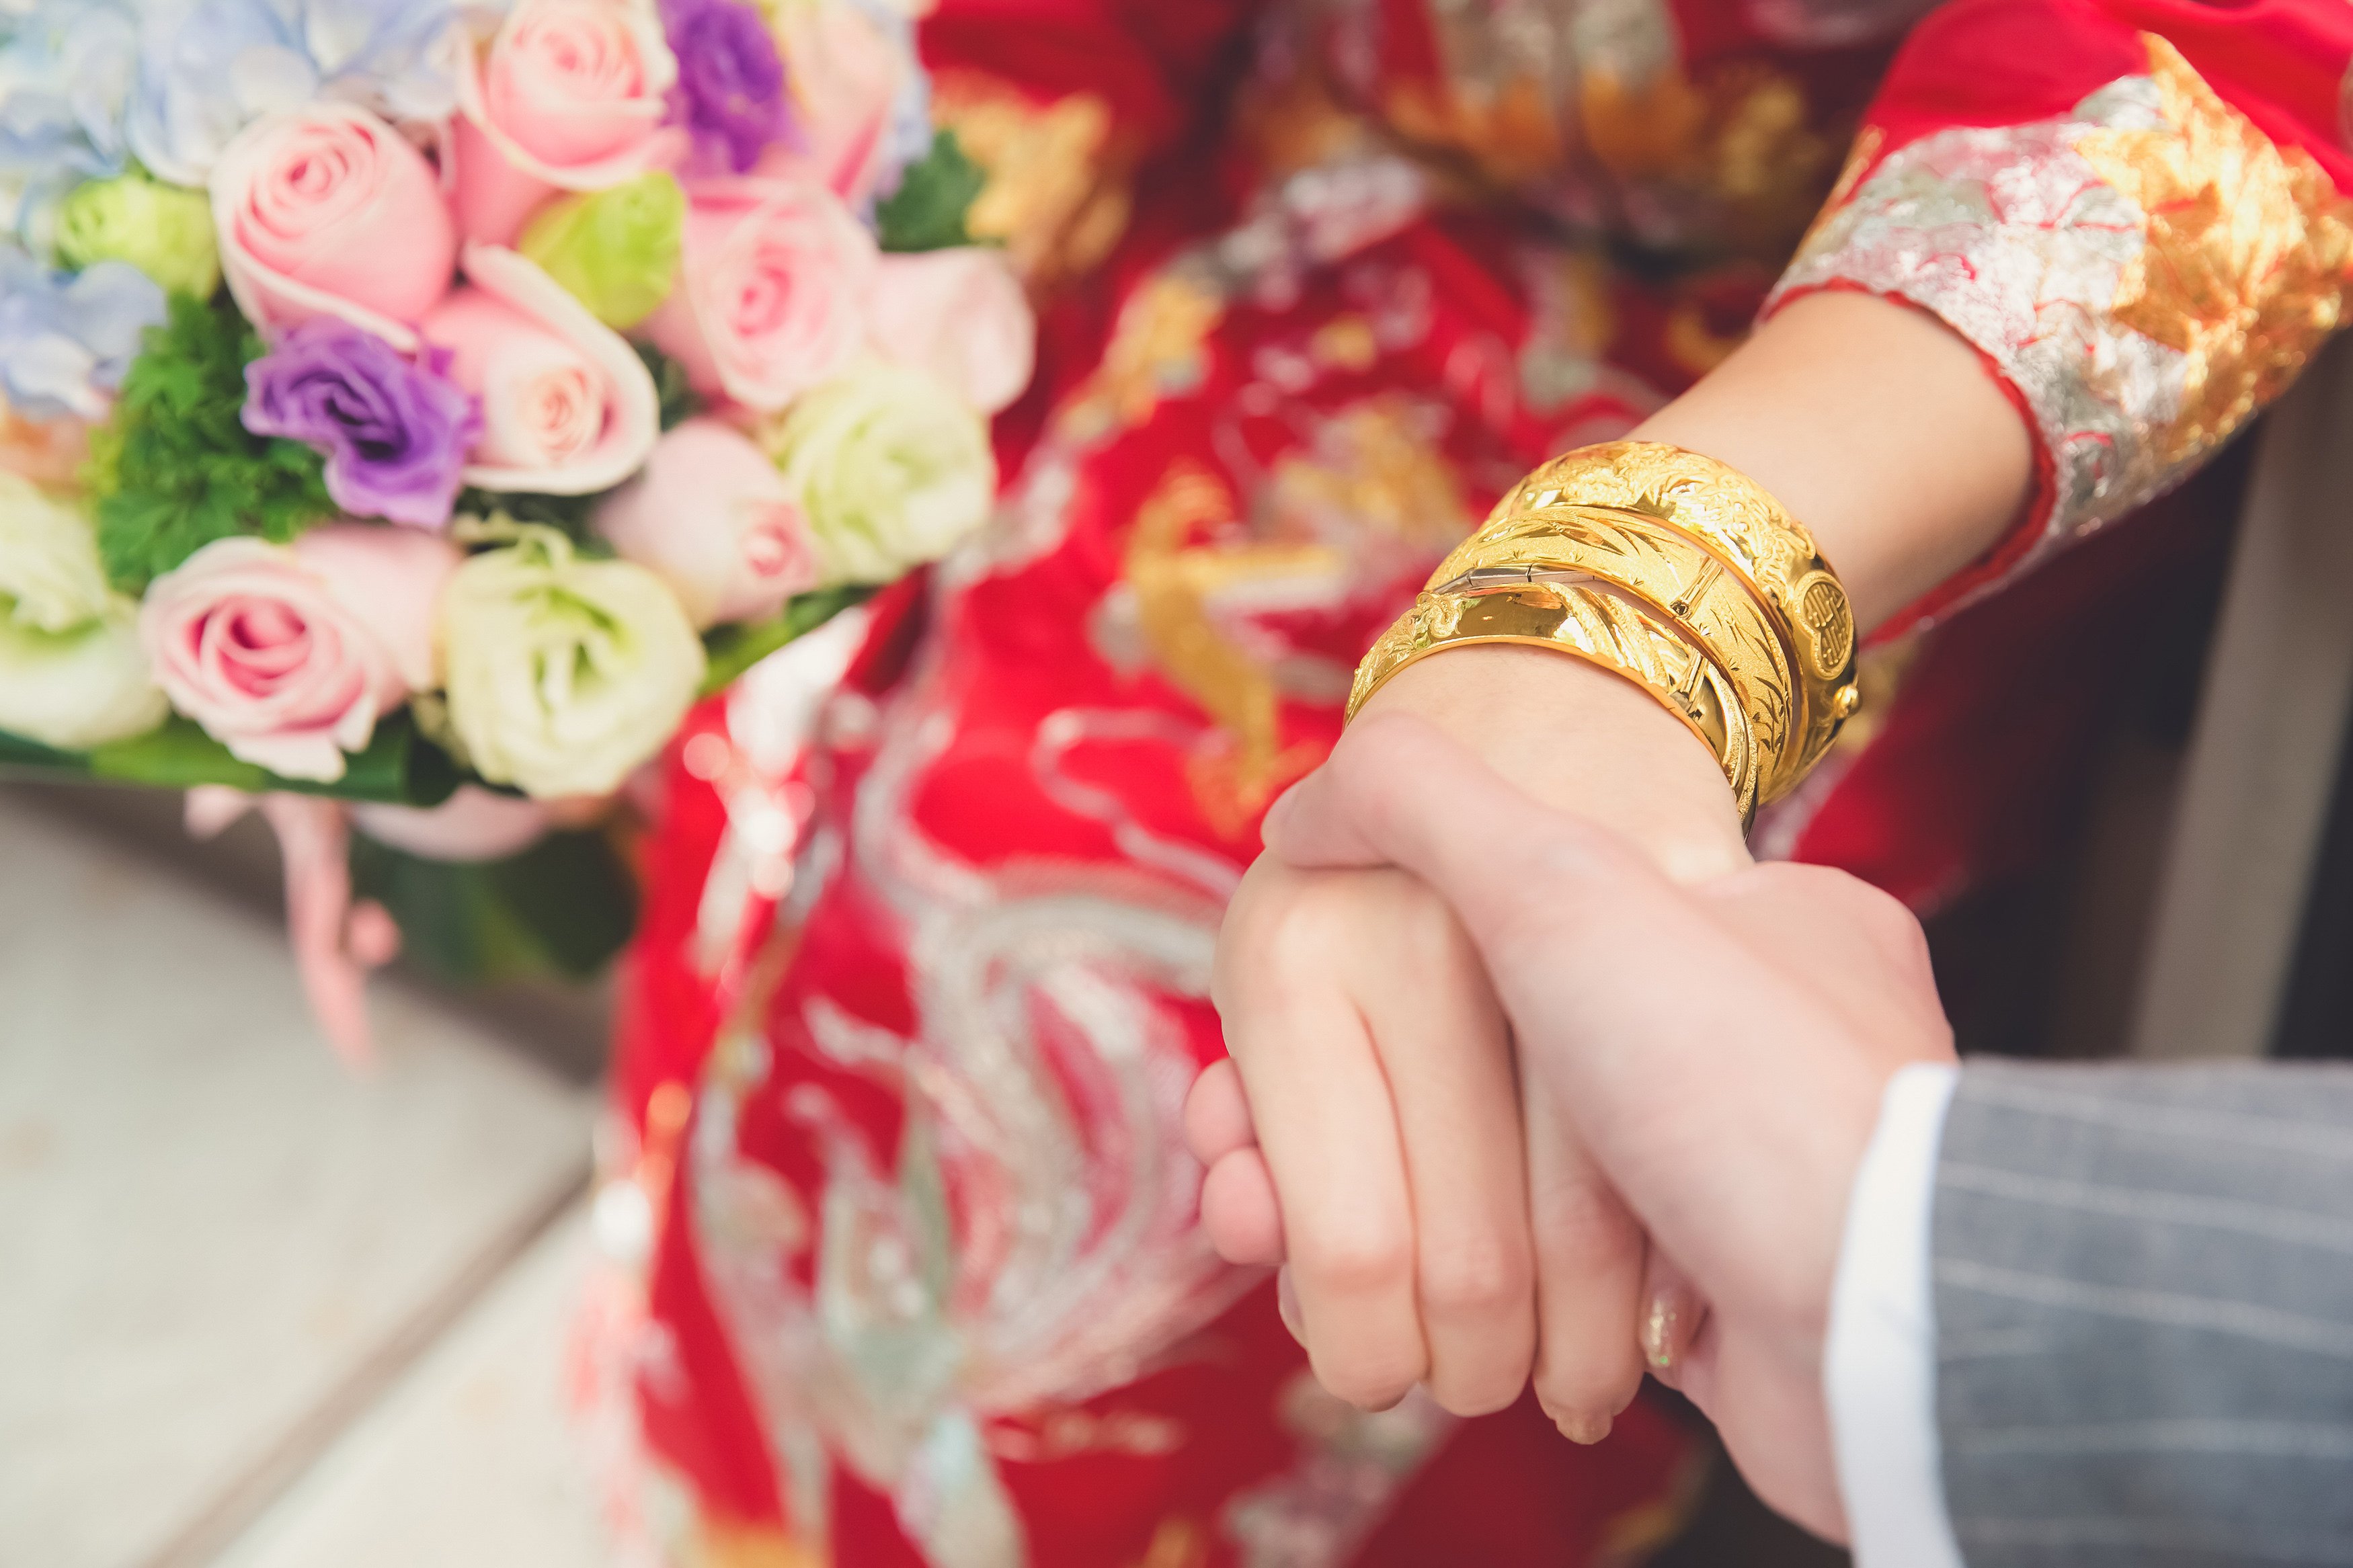 China’s gender imbalance, a legacy of its one-child policy, has encouraged families with daughters to demand an increasingly high caili, or betrothal gift, from their prospective in-laws. Photo: Shutterstock